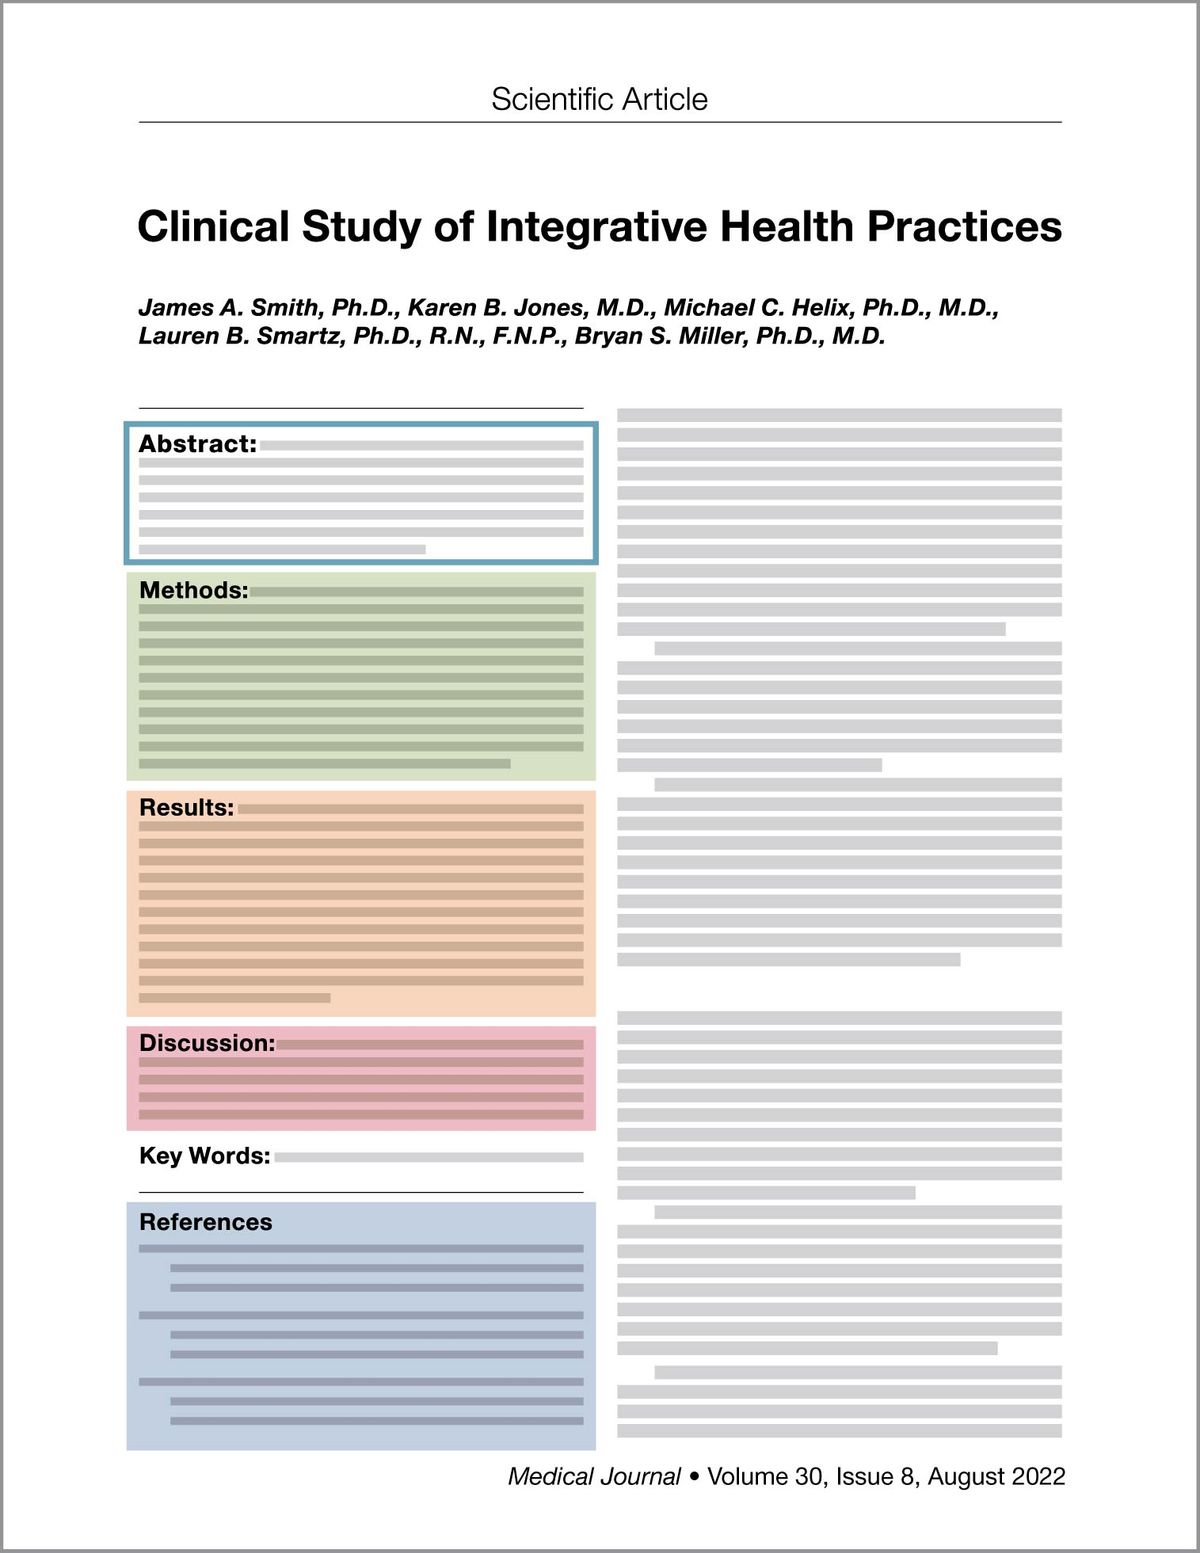 The words “Scientific Article” appear at the top of the page, with a fictional title, Clinical Study of Integrative Health Practices, below them. A fictional list of authors, James A. Smith, Ph.D., Karen B. Jones, M.D., Michael C. Helix, Ph.D., M.D., Lauren B. Smartz, Ph.D., R.N., F.N.P., Bryan S. Miller, Ph.D., M.D., appears under the title. The left column shows labeled sections of the journal article: Abstract, Methods, Results, Discussion, Key Words, References. All sections except Key Words are clickable. Gray lines appear in place of the text in each section in the left column and in the entire right column. These words appear at the lower right: Medical Journal Volume 30, Issue 8, August 2022